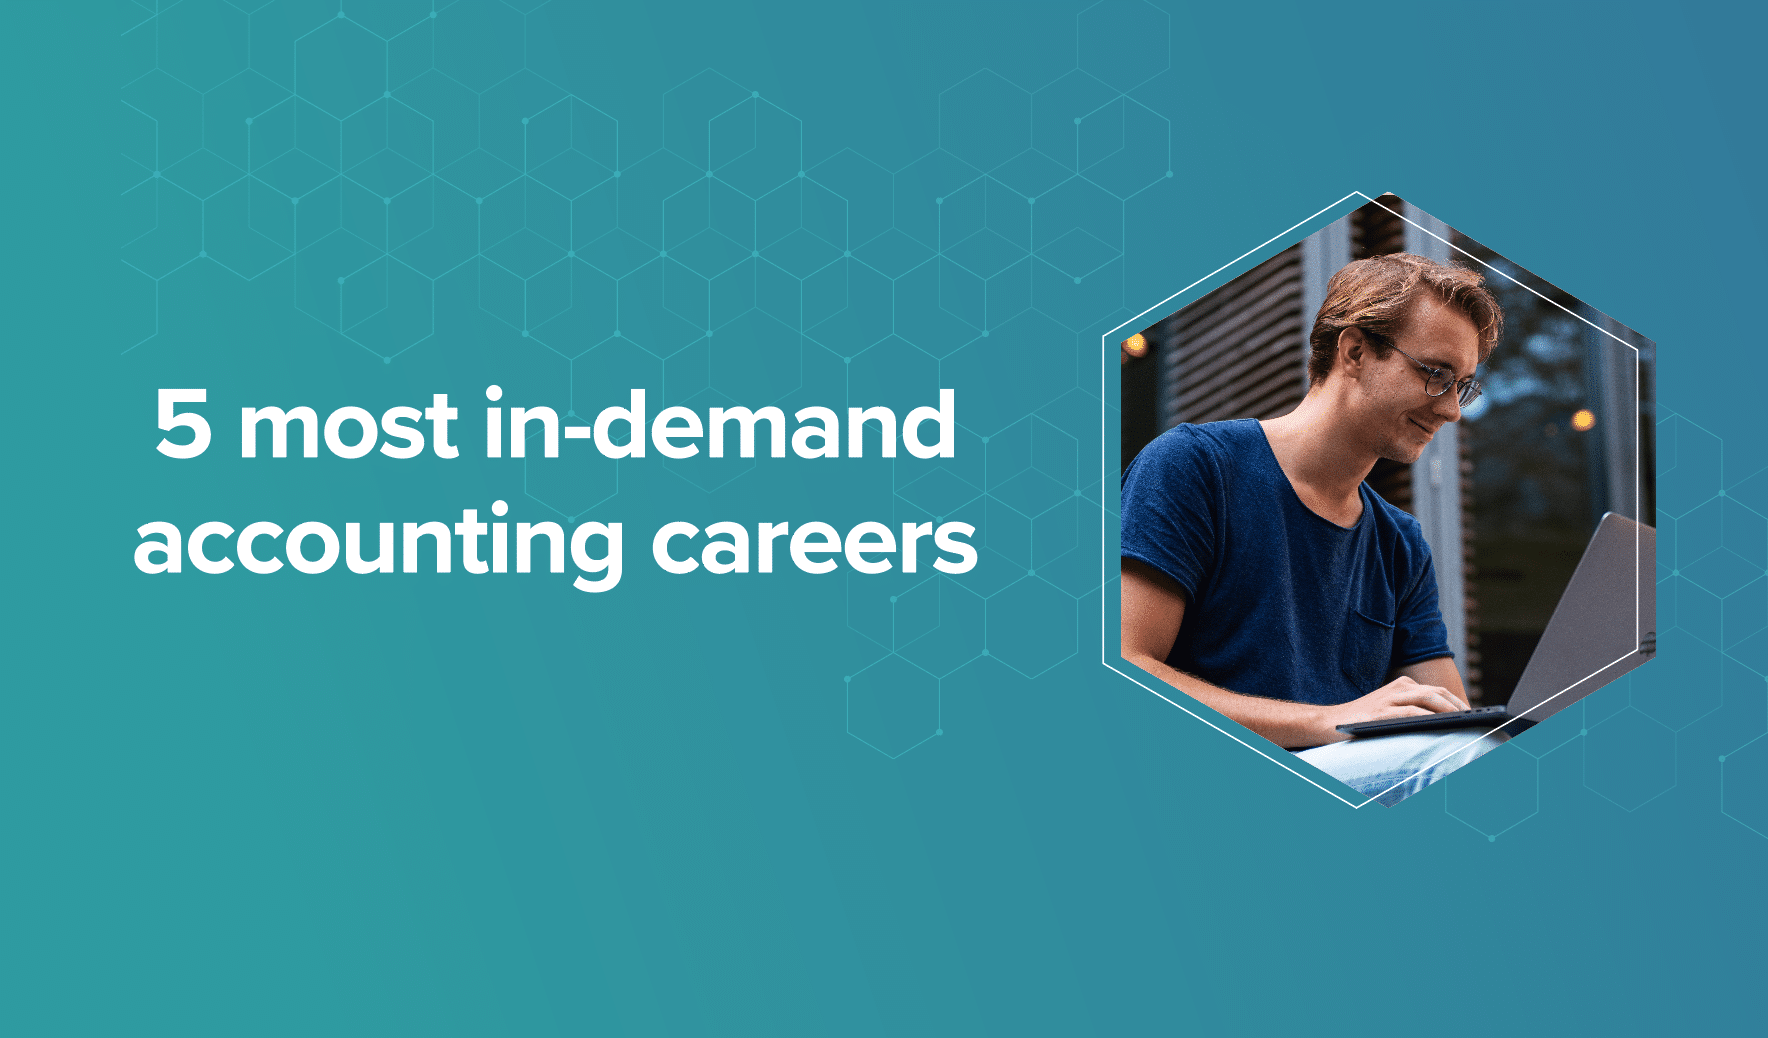 Top 5 most in-demand accounting careers 